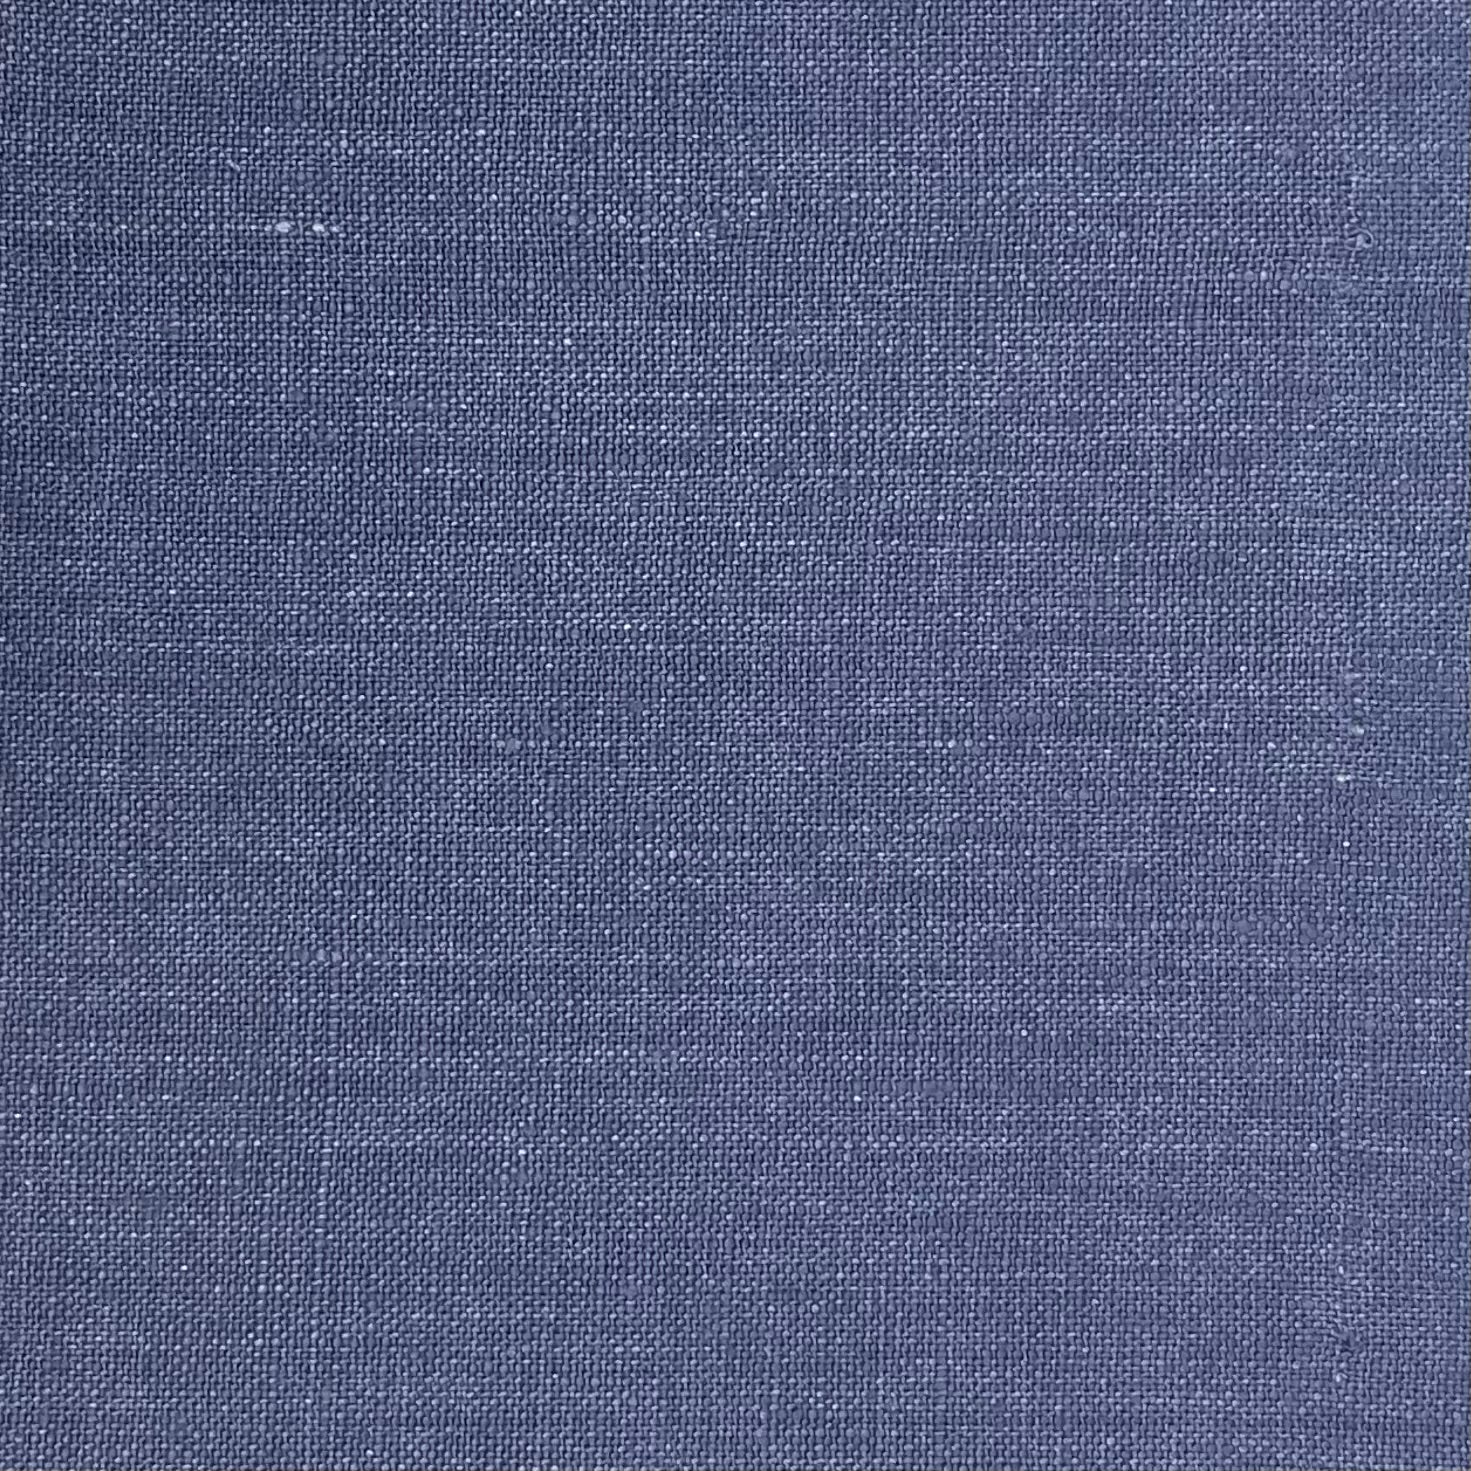 Kensington 100% Linen Fabric By The Yard, Curtain, Drapery, Table Top, 57" Width/CL1066